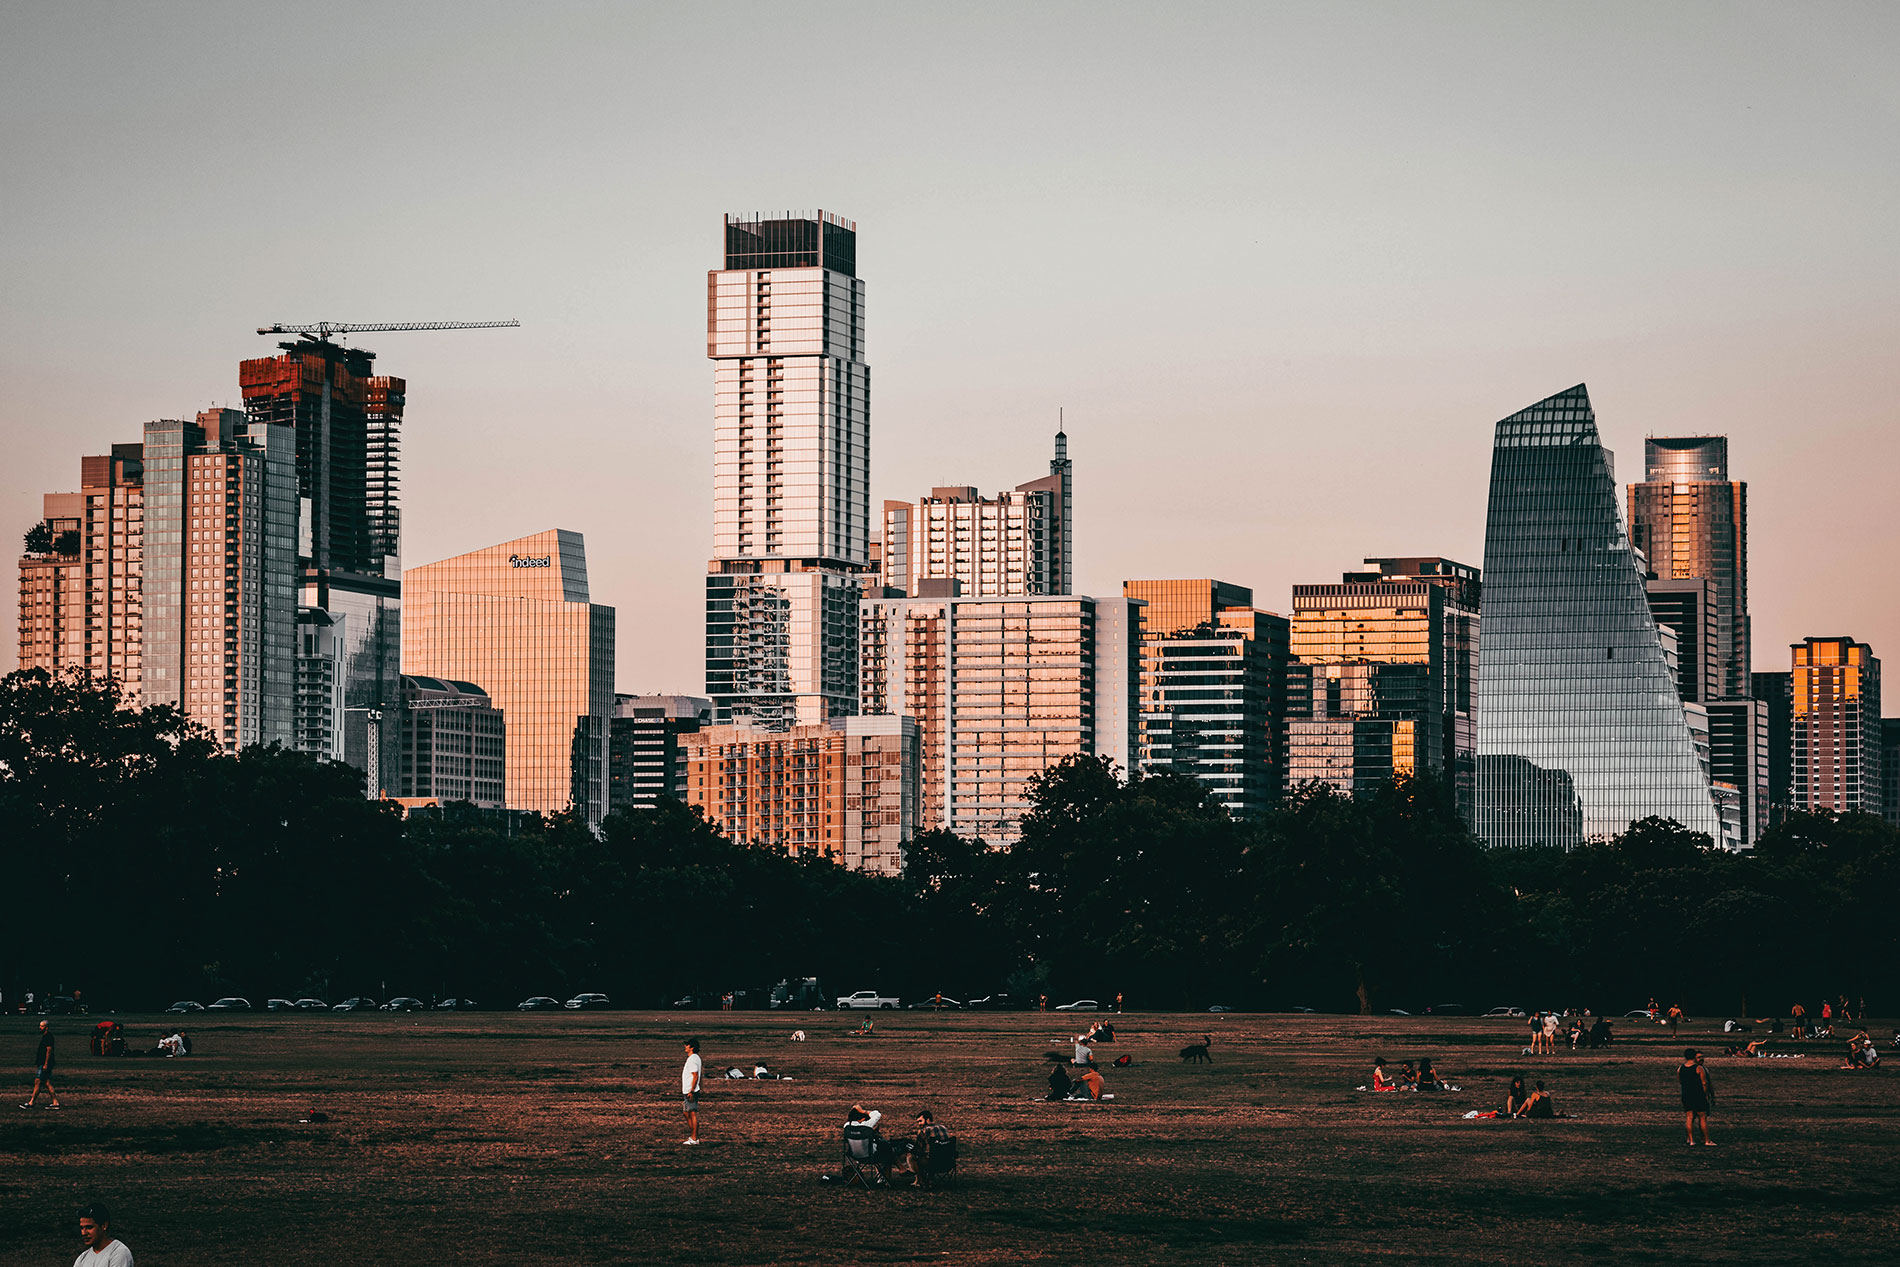 People in a park against the Austin skyline at dusk. Image by Parker George / PFG.